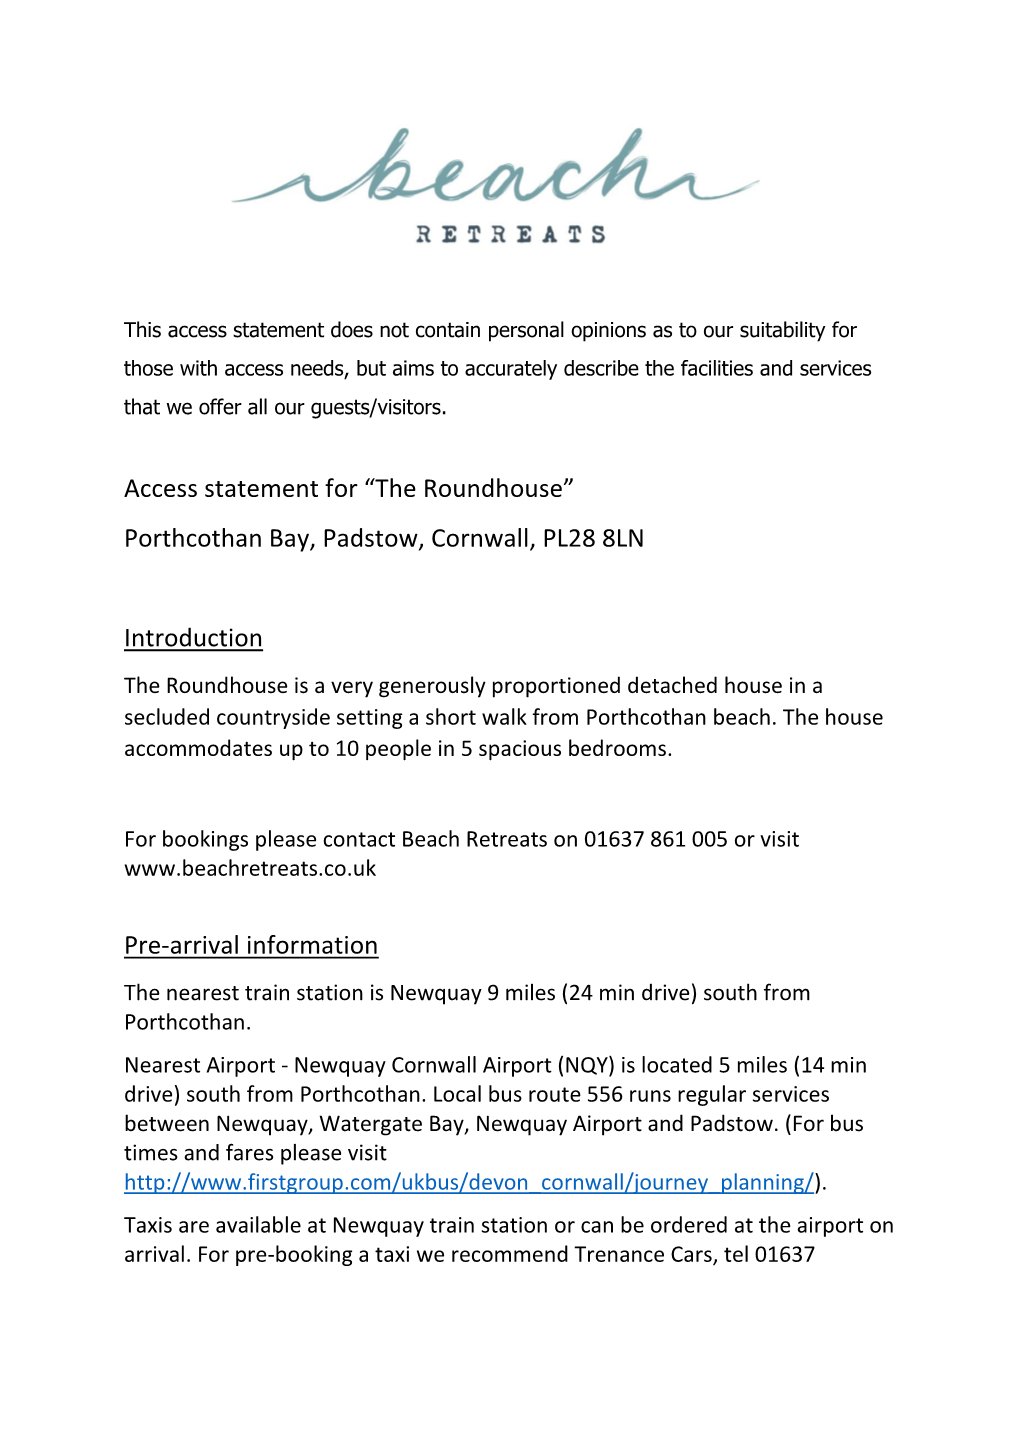 Access Statement for “The Roundhouse” Porthcothan Bay, Padstow, Cornwall, PL28 8LN